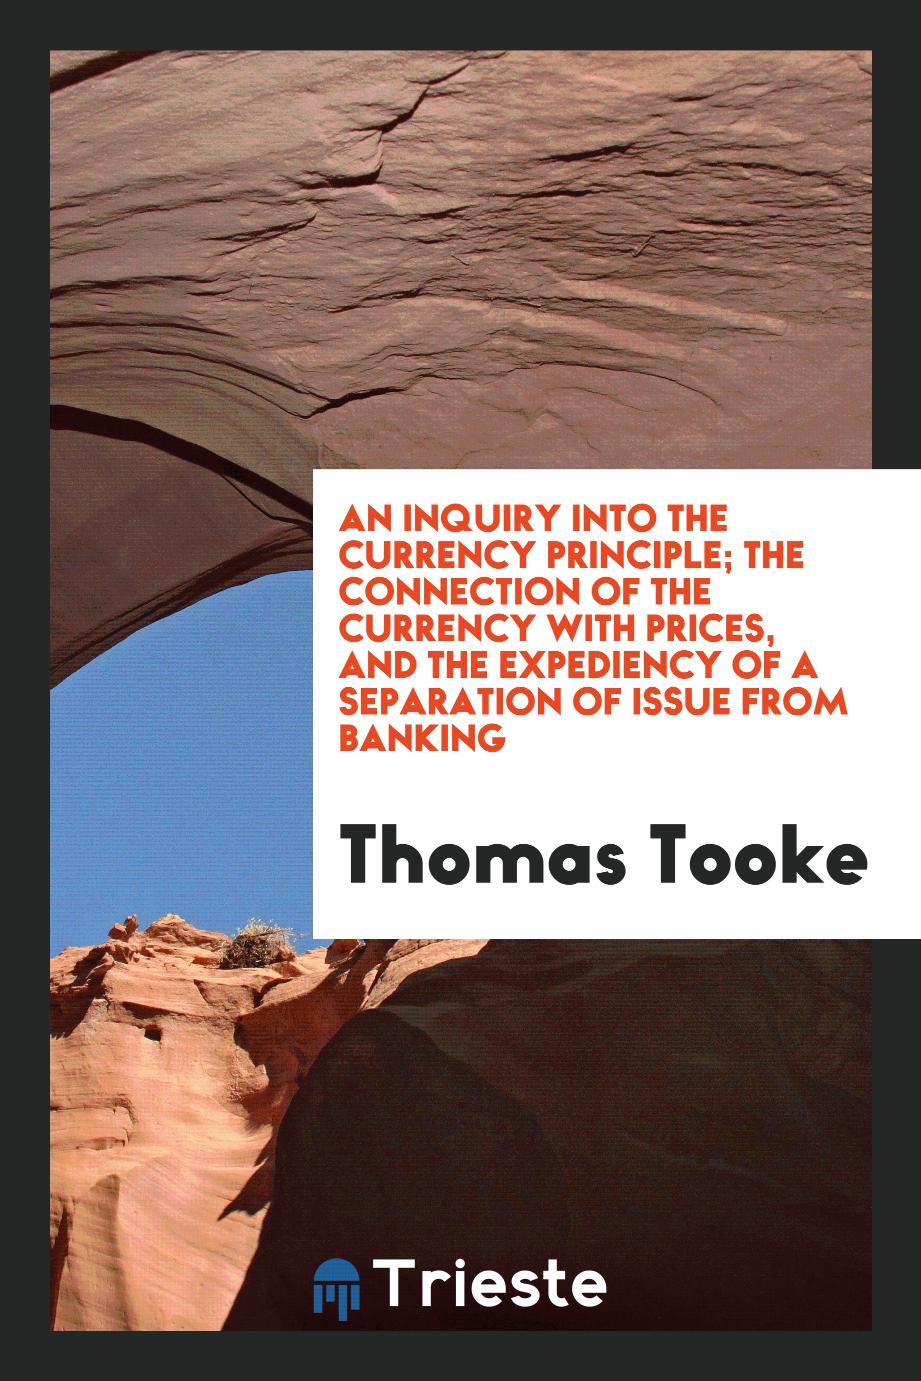 An Inquiry into the Currency Principle; The Connection of the Currency with Prices, and the Expediency of a Separation of Issue from Banking